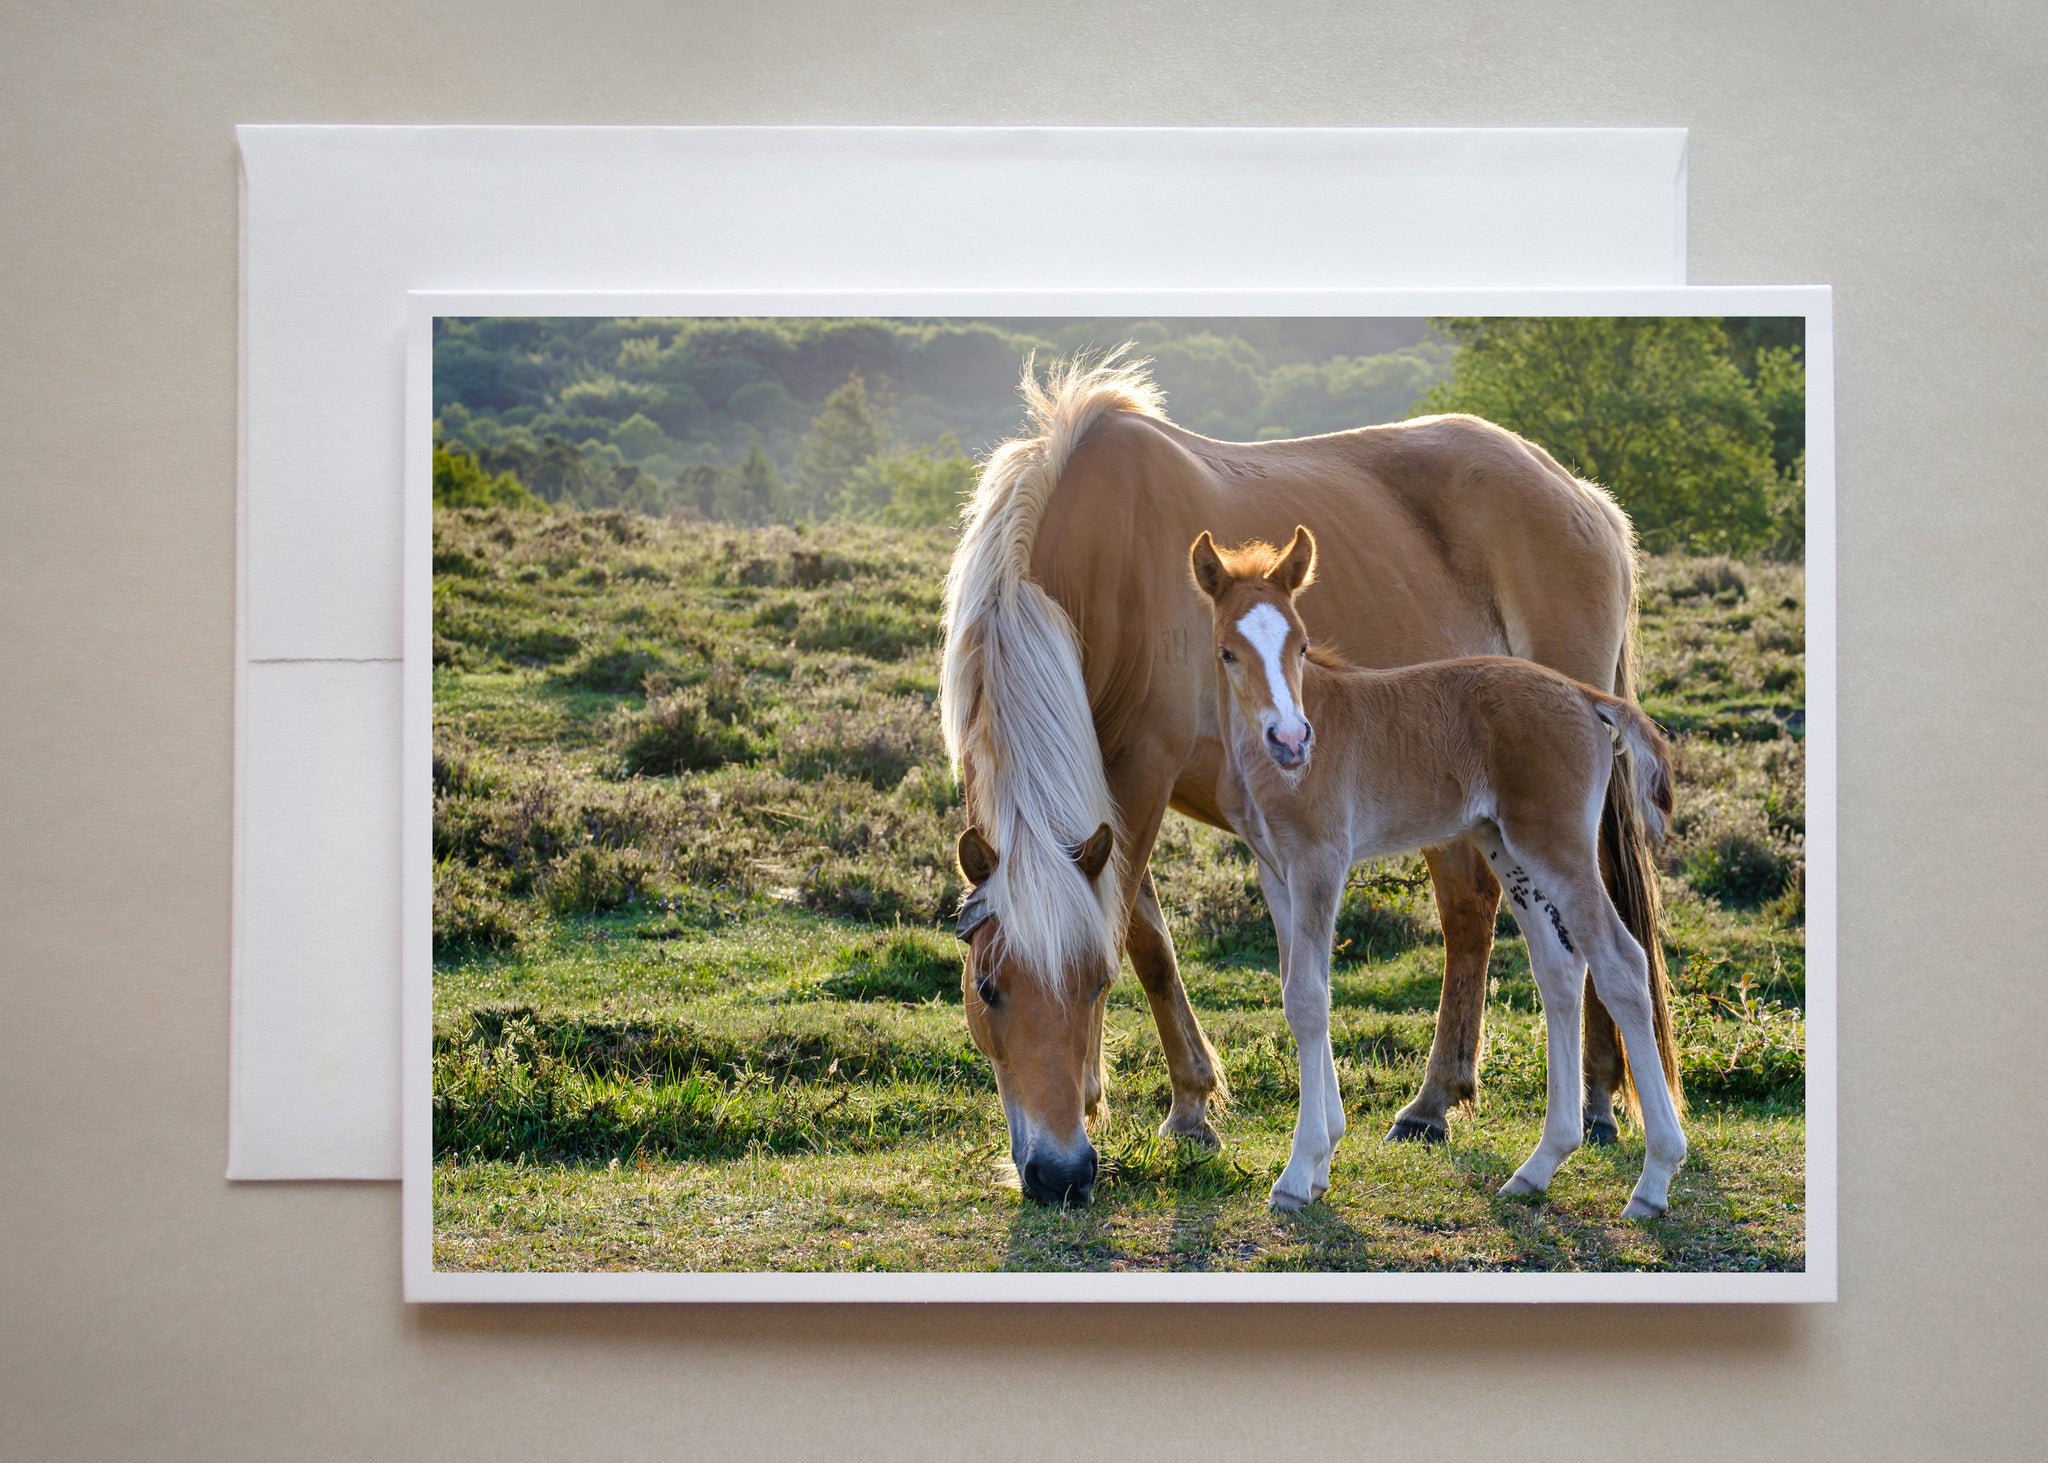 A stunning nature photograph of a new foal with his horse mom.  Soft sunlight is draping over their bodies. Photographed  in New Forest, England  by photographer Judy Harrison Cochand. 